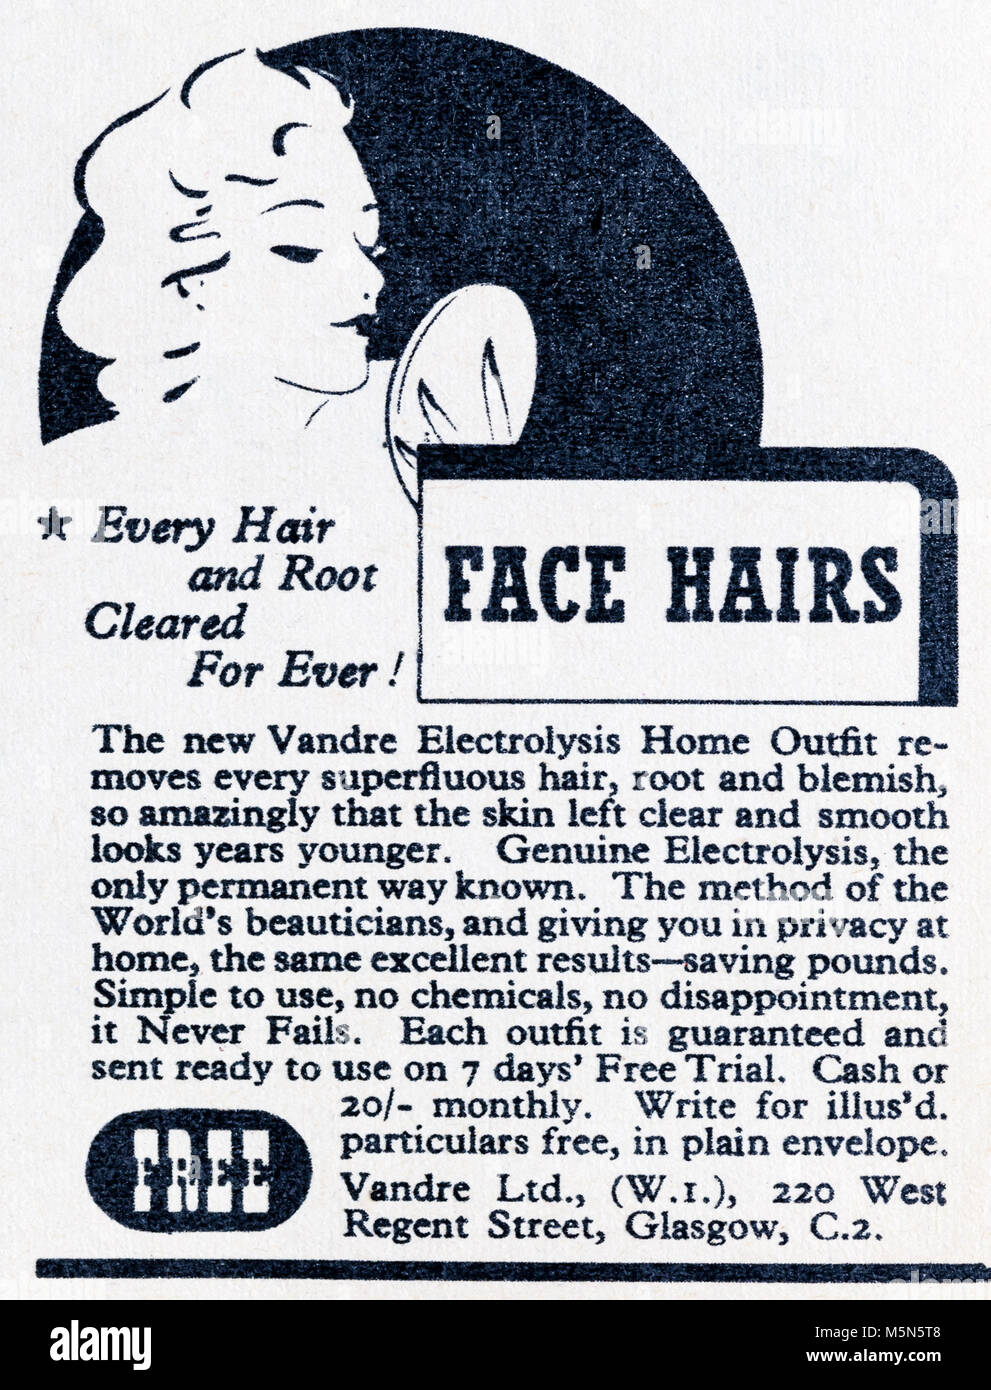 1950s magazine advert advertising the Vandre Electrolysis Home outfit to remove facial hair. Stock Photo